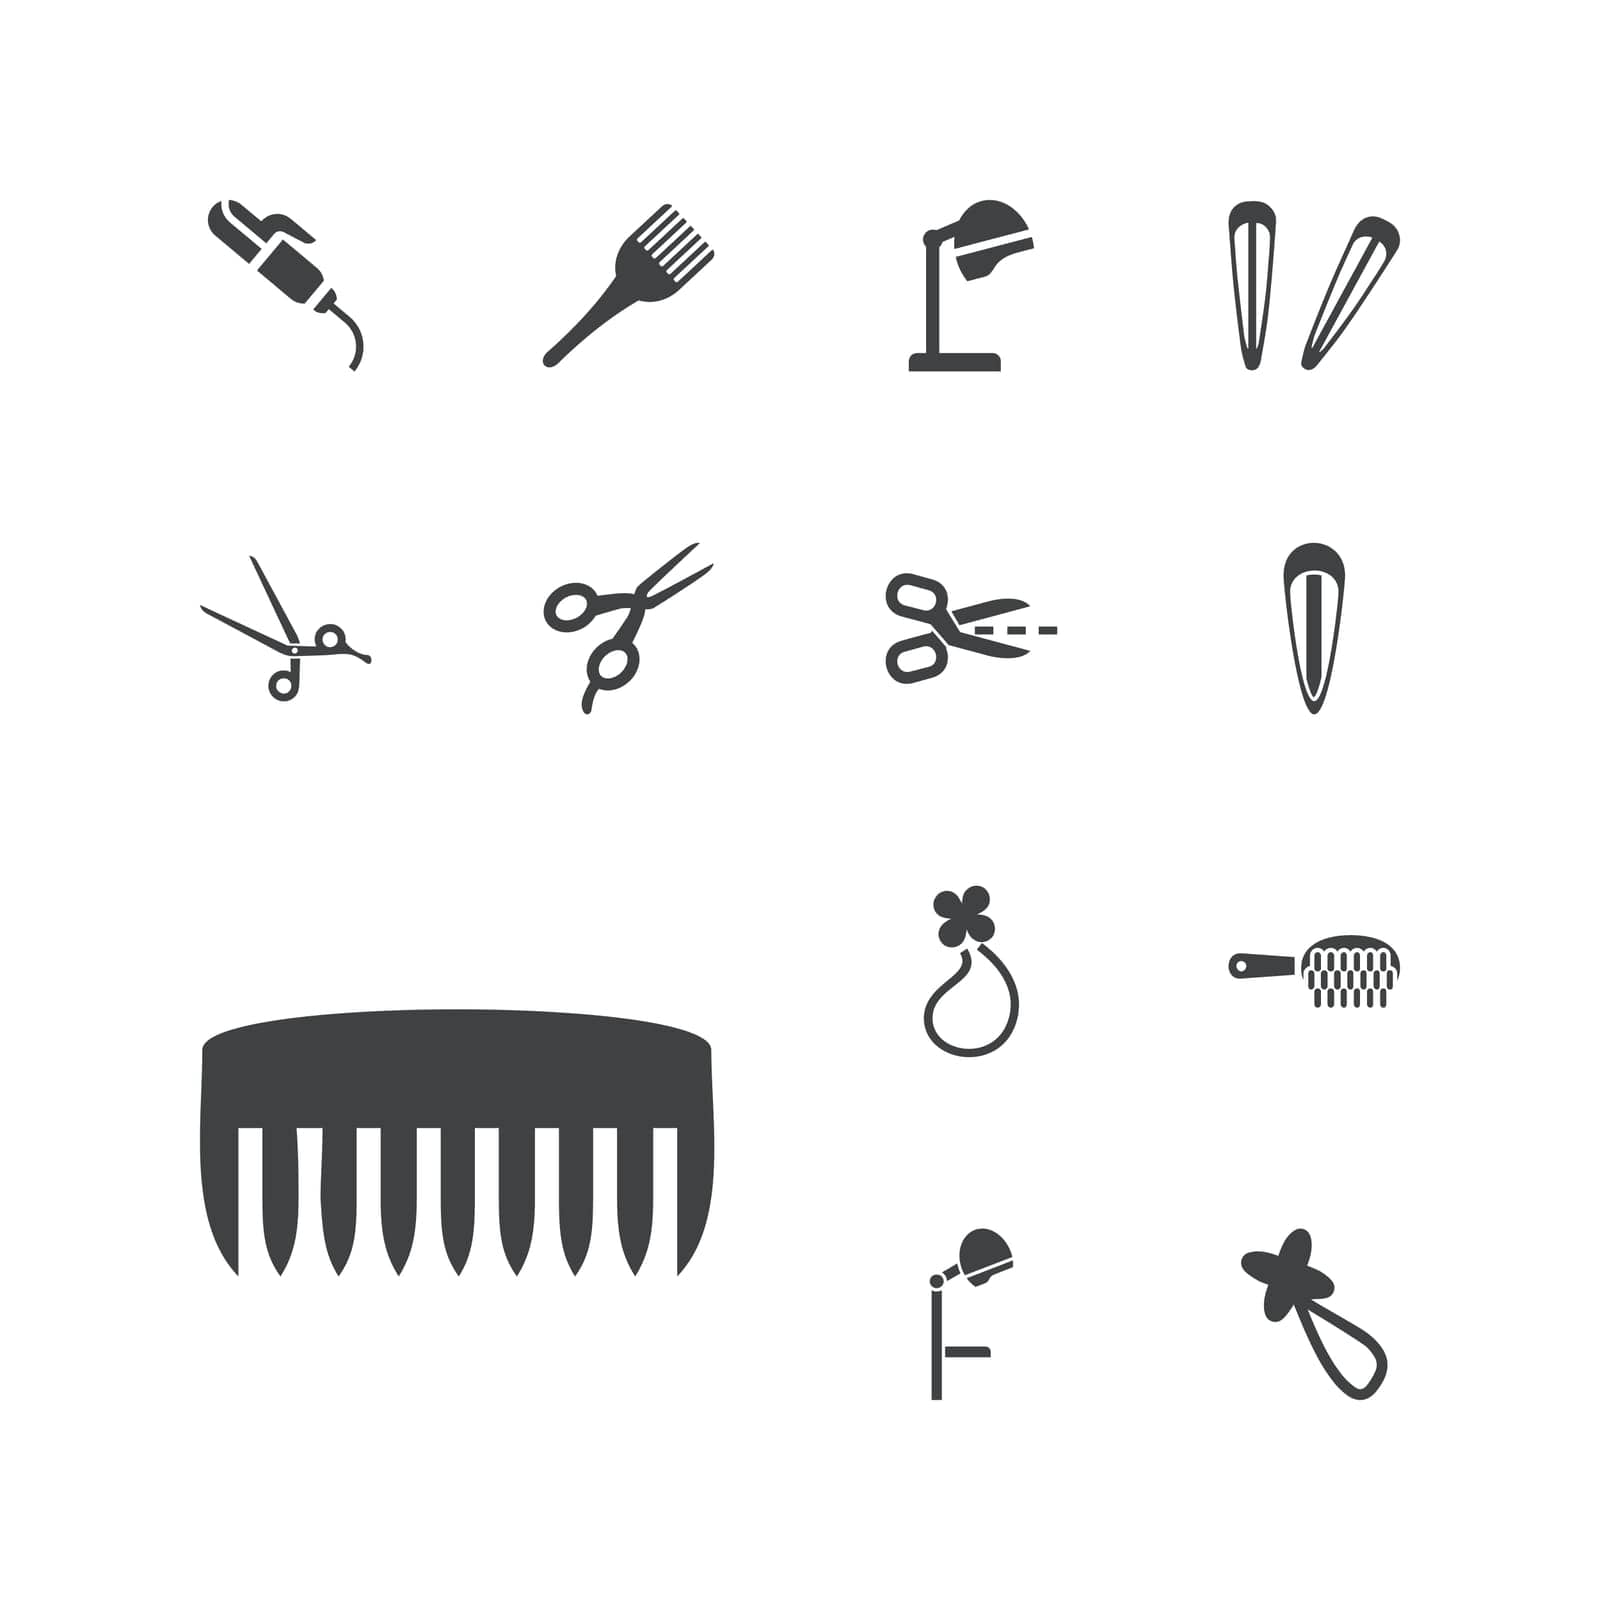 symbol,beauty,icon,sign,isolated,curler,hair,hairdresser,pin,white,design,coloring,vector,barber,element,brush,art,set,hairdressing,black,equipment,haircut,tool,dryer,comb,hairstyle,scissors,barrette,background,style,illustration,clip,object,fashion,care,salon